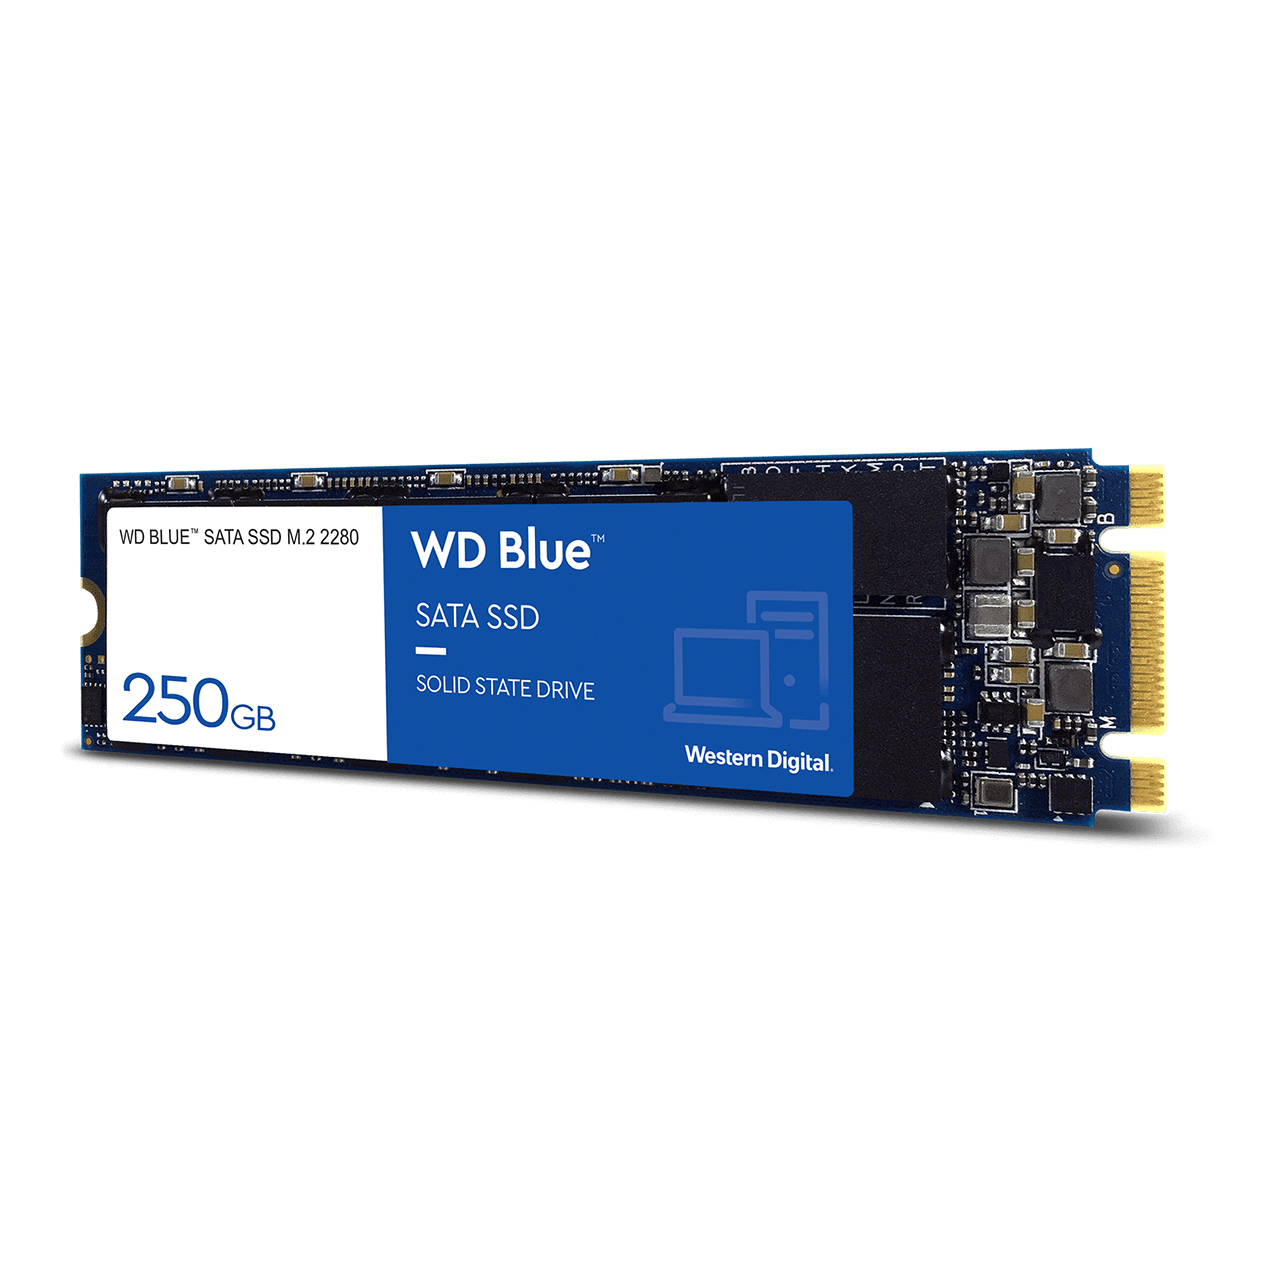 https://www.westerndigital.com/content/dam/store/en-us/assets/products/internal-storage/wd-blue-3d-nand-sata-ssd/gallery/m2/wd-blue-3d-nand-sata-ssd-m2-2280-250GB-right.png.thumb.1280.1280.png